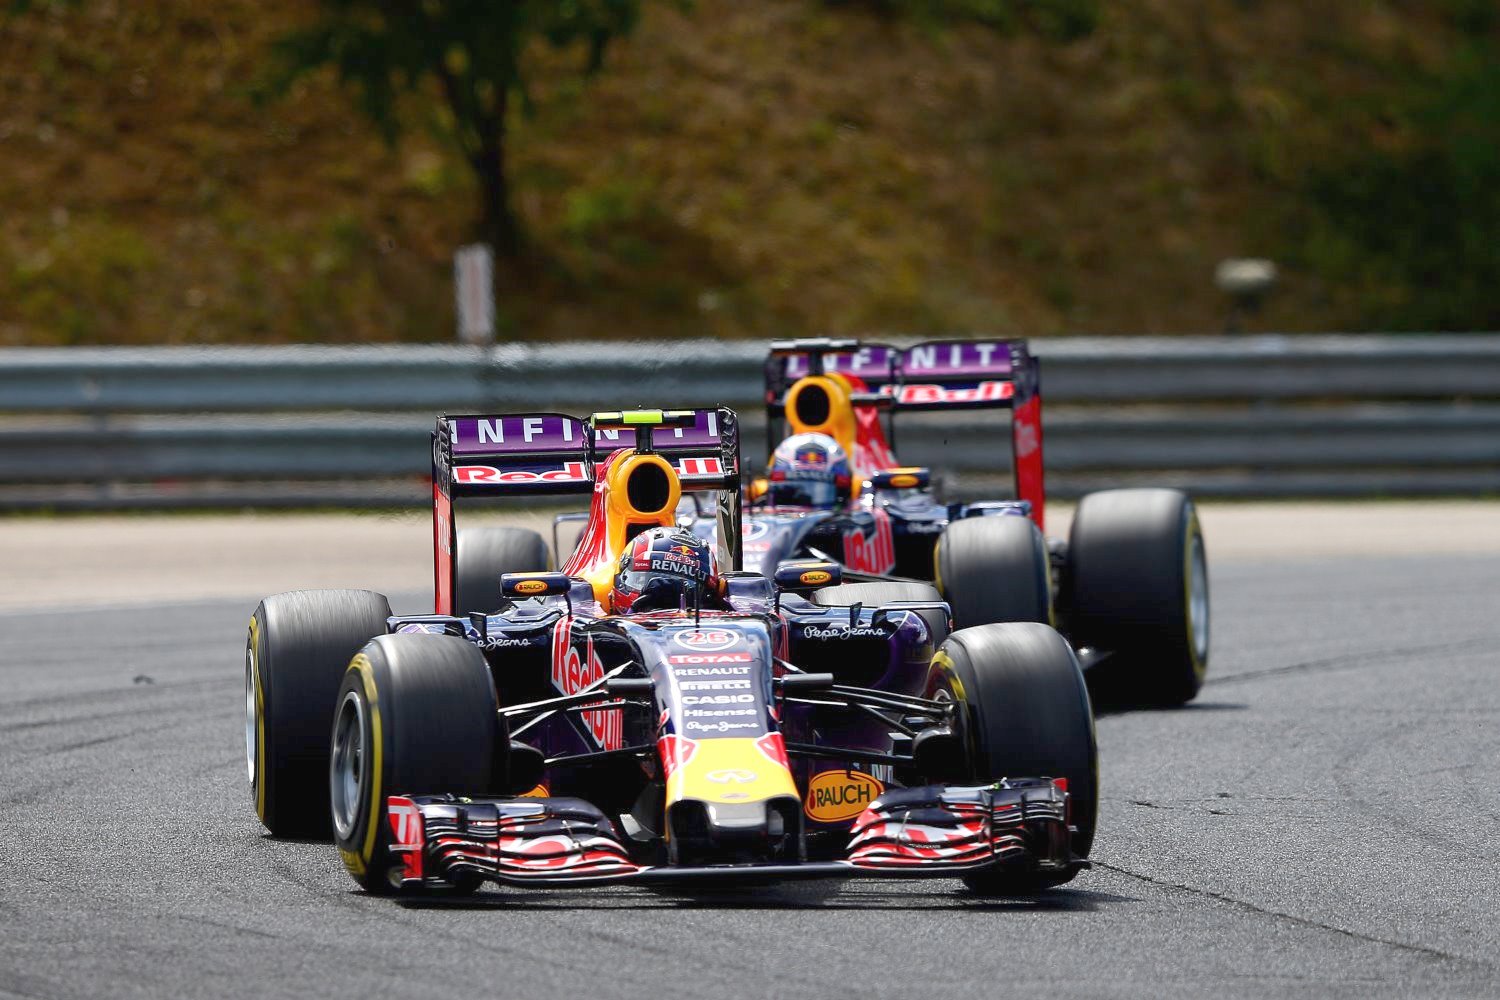 Adrian Newey is back and the Red Bulls are fast again